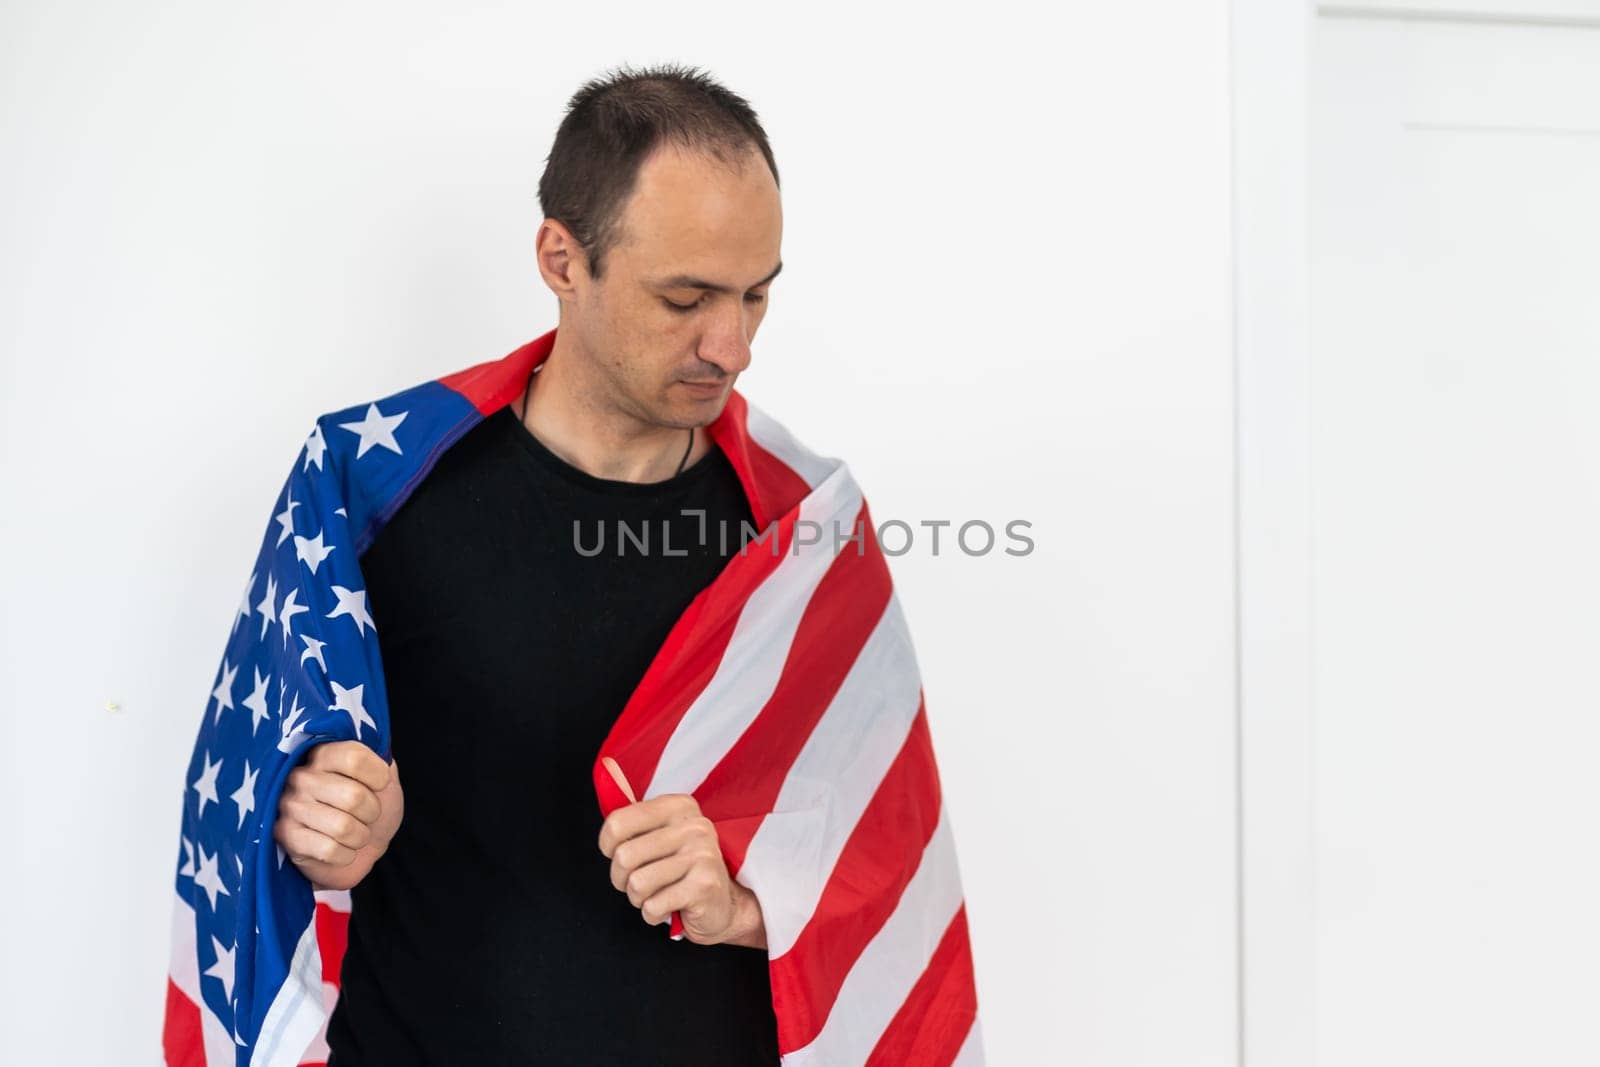 Man holding flag and posing for photoshoot by Andelov13